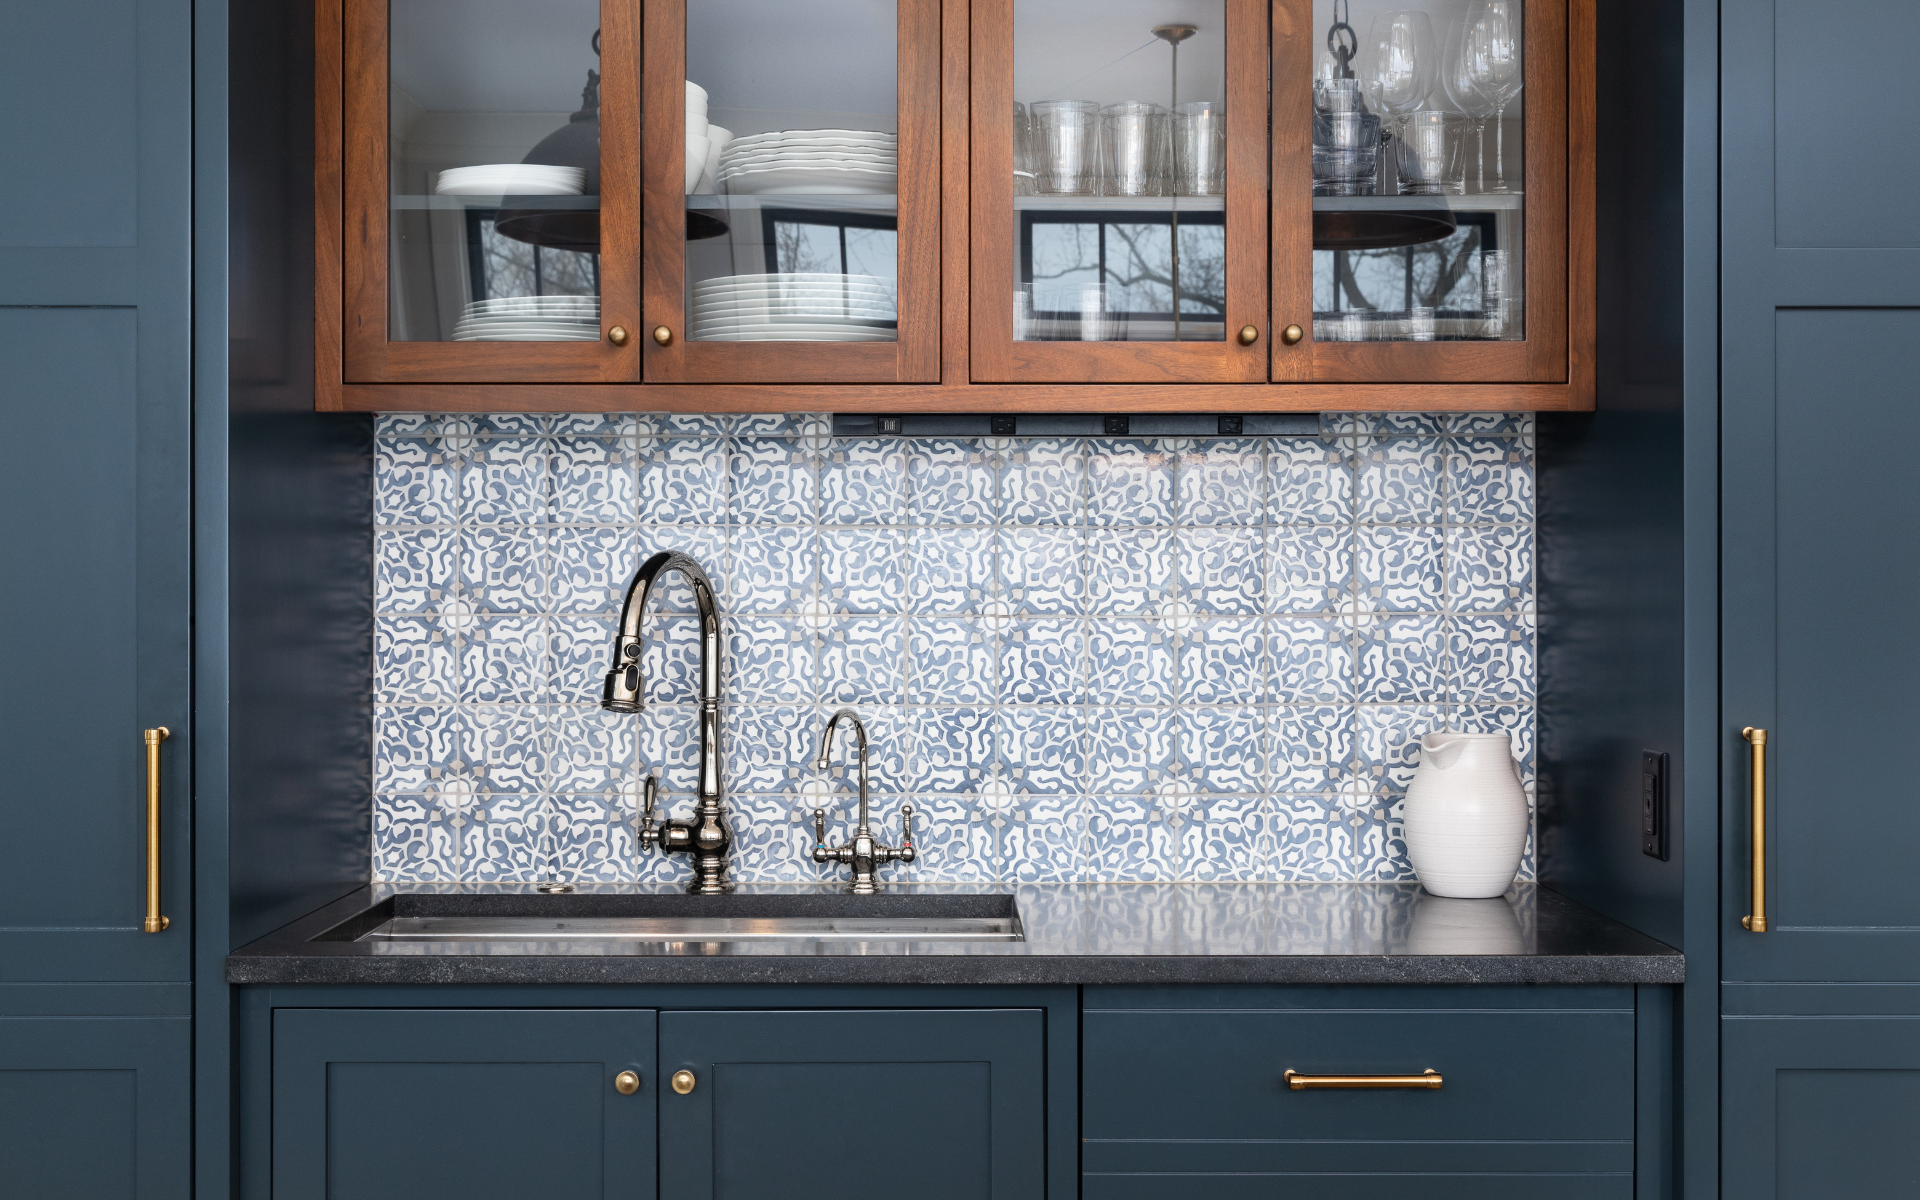 Kitchen with Navy cabinets and moroccan floor tile backsplash